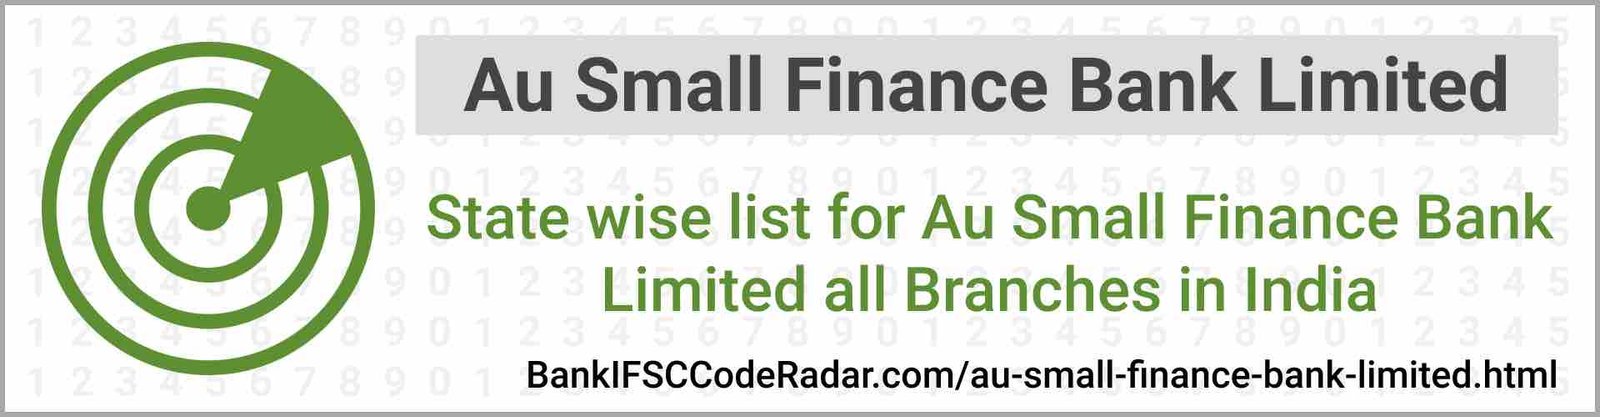 Au Small Finance Bank Limited All Branches India